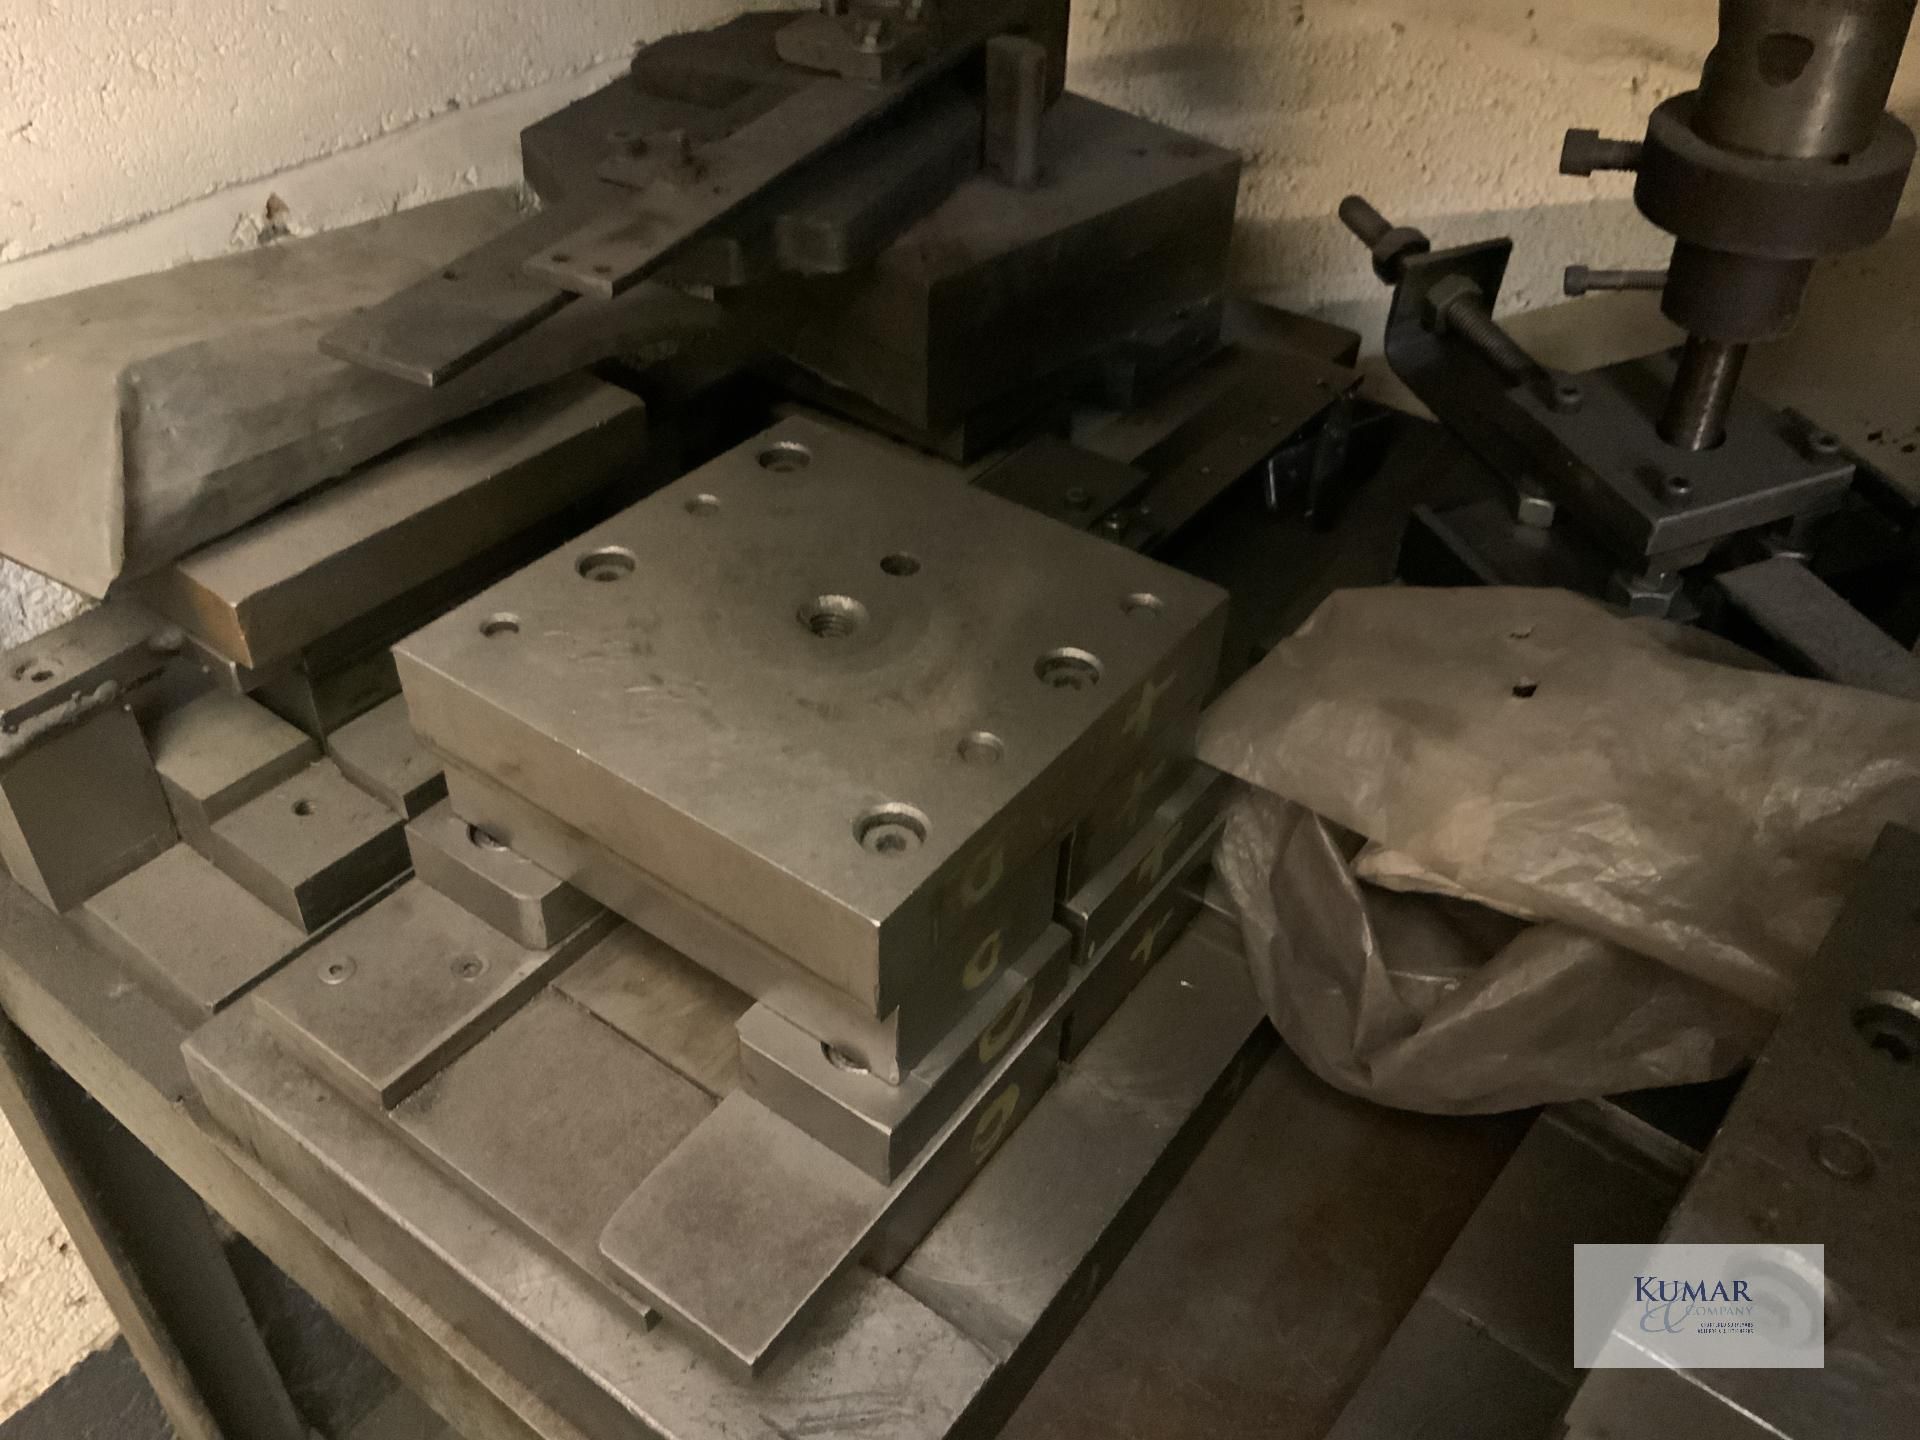 Machine tooling as imaged  Collection Day – Tuesday 27th February Unit 4 Goscote Industrial - Image 6 of 9